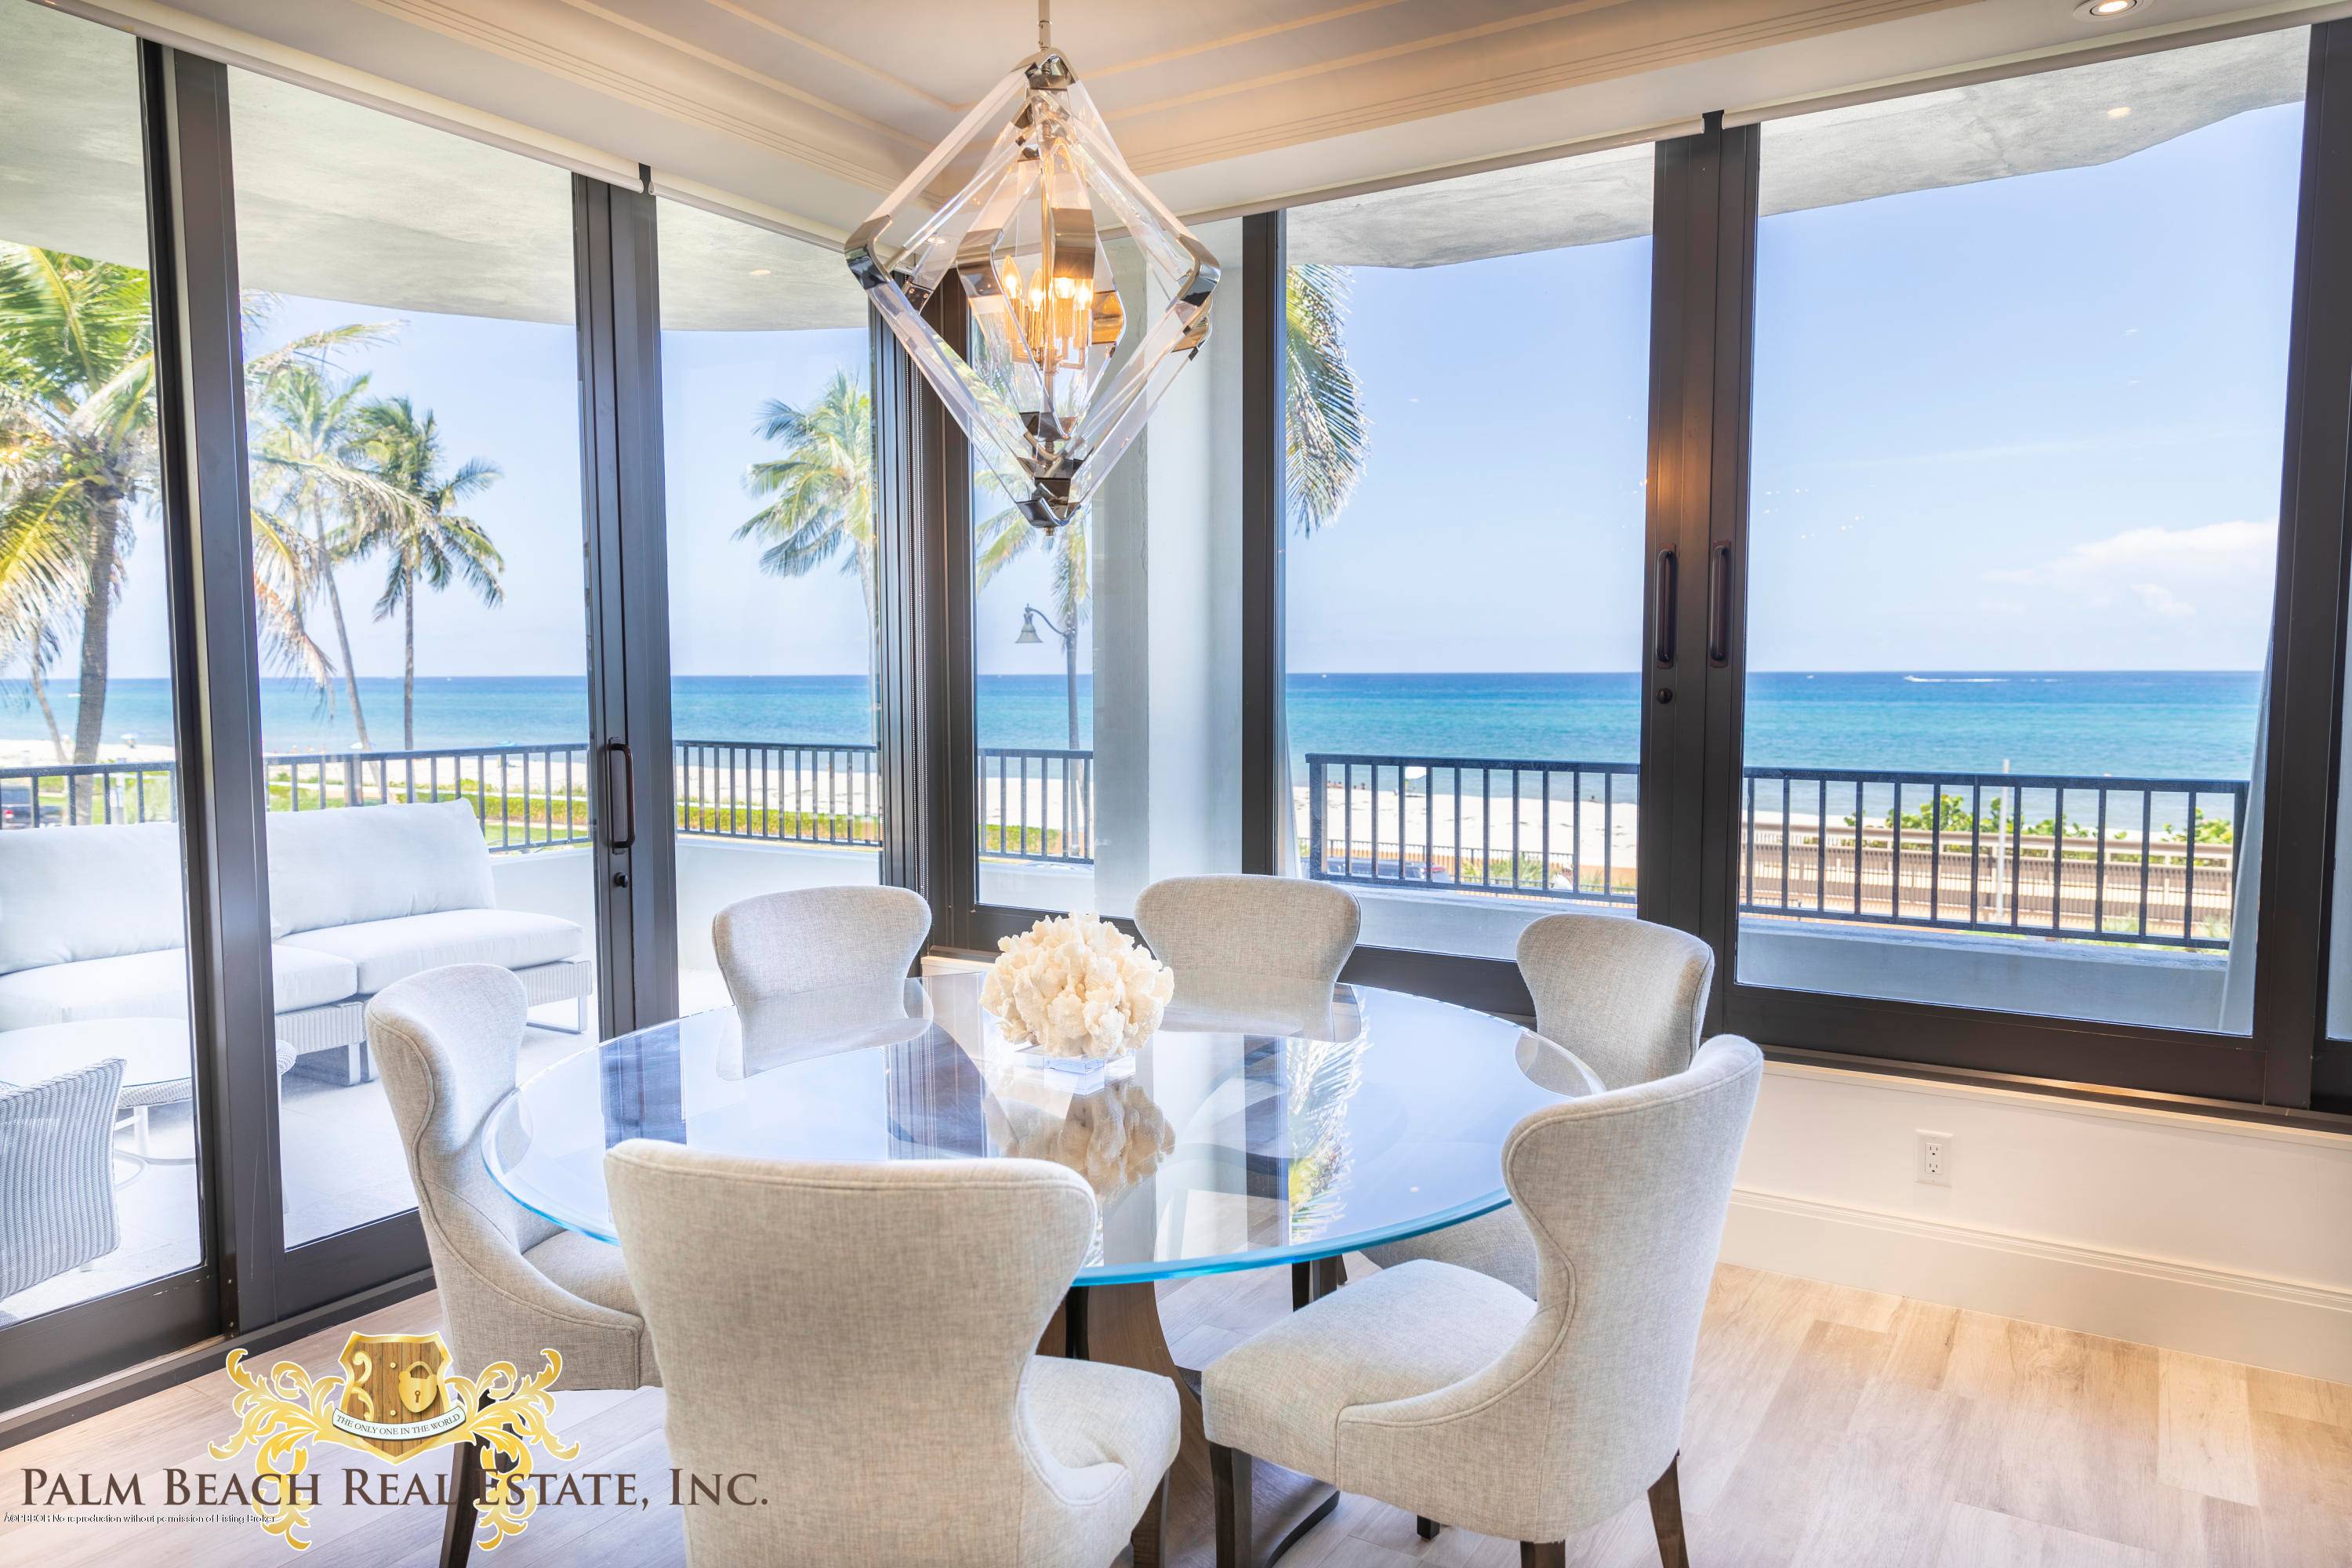 The Dunster House never contested one of the most prestigious low density oceanfront buildings on Palm Beach.